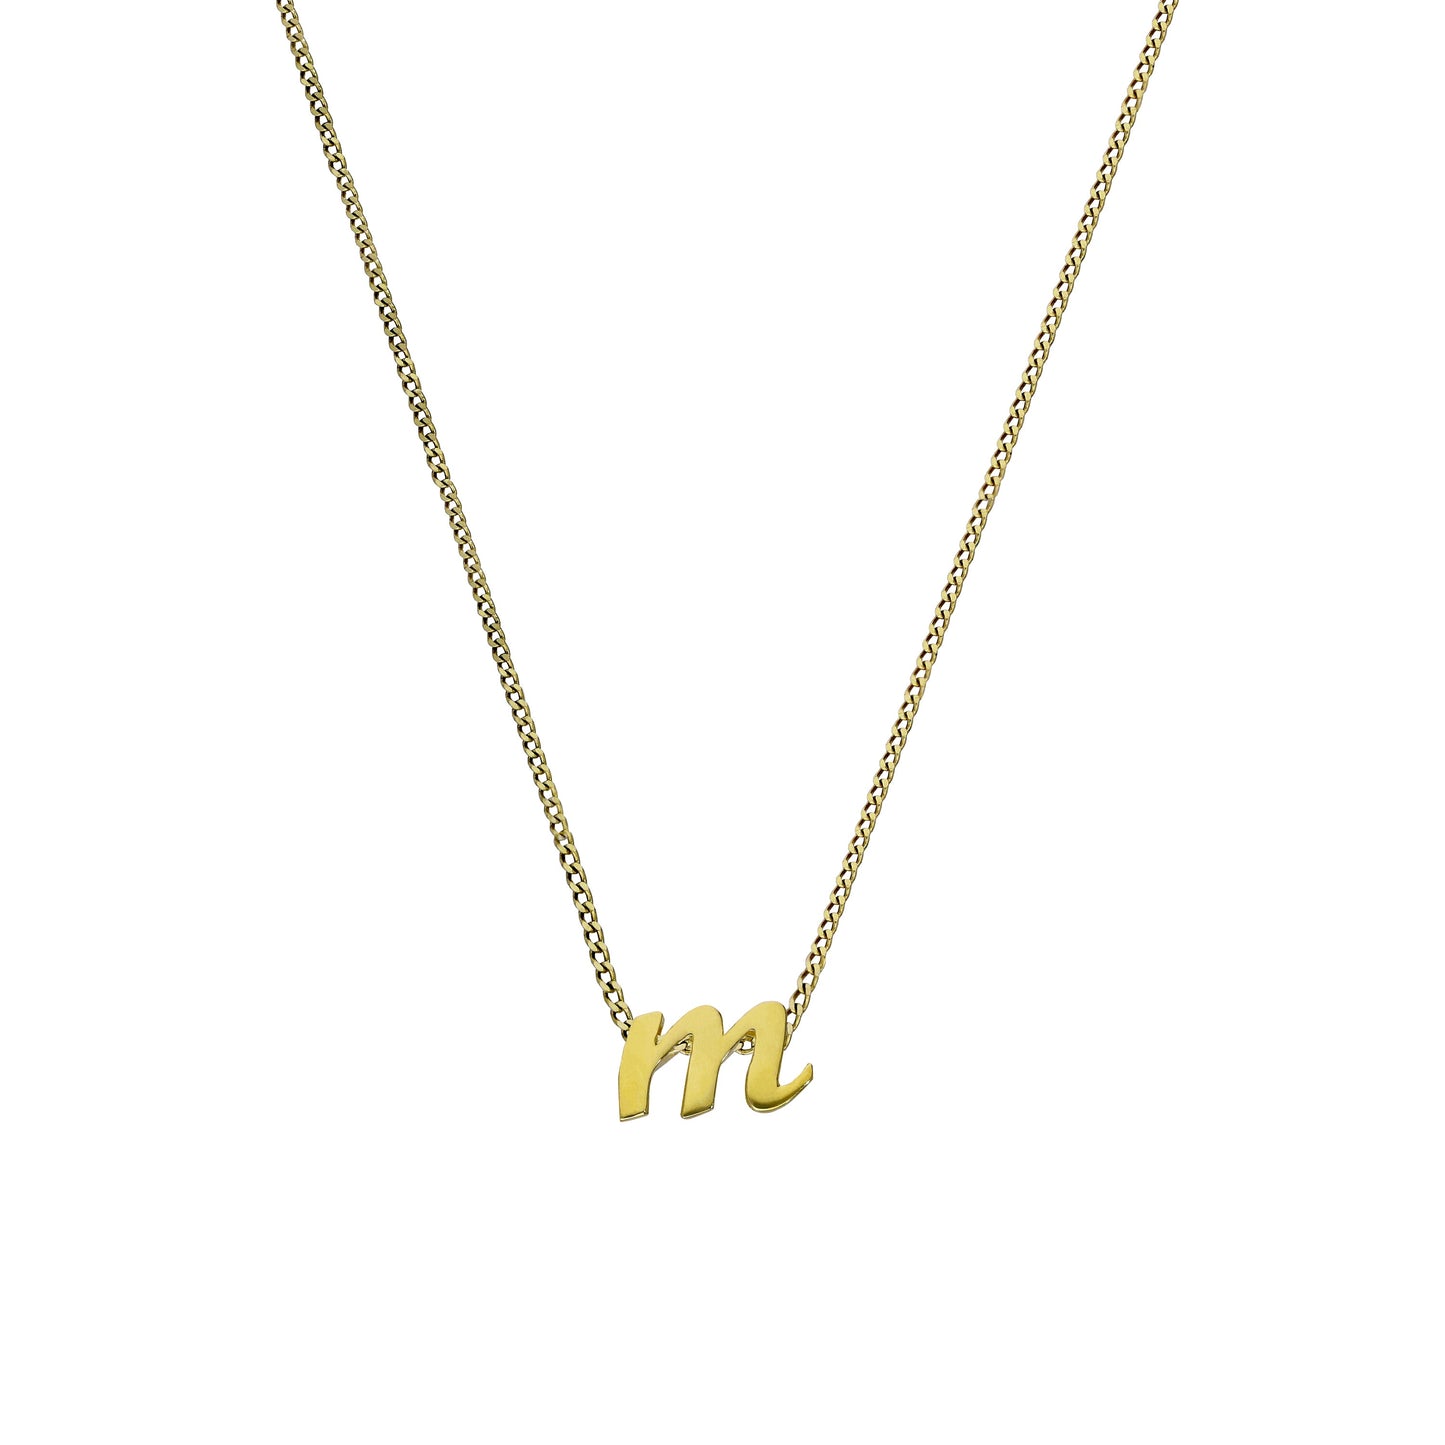 Tiny 9ct Gold Alphabet Letter M Pendant Necklace 16 - 20 Inches